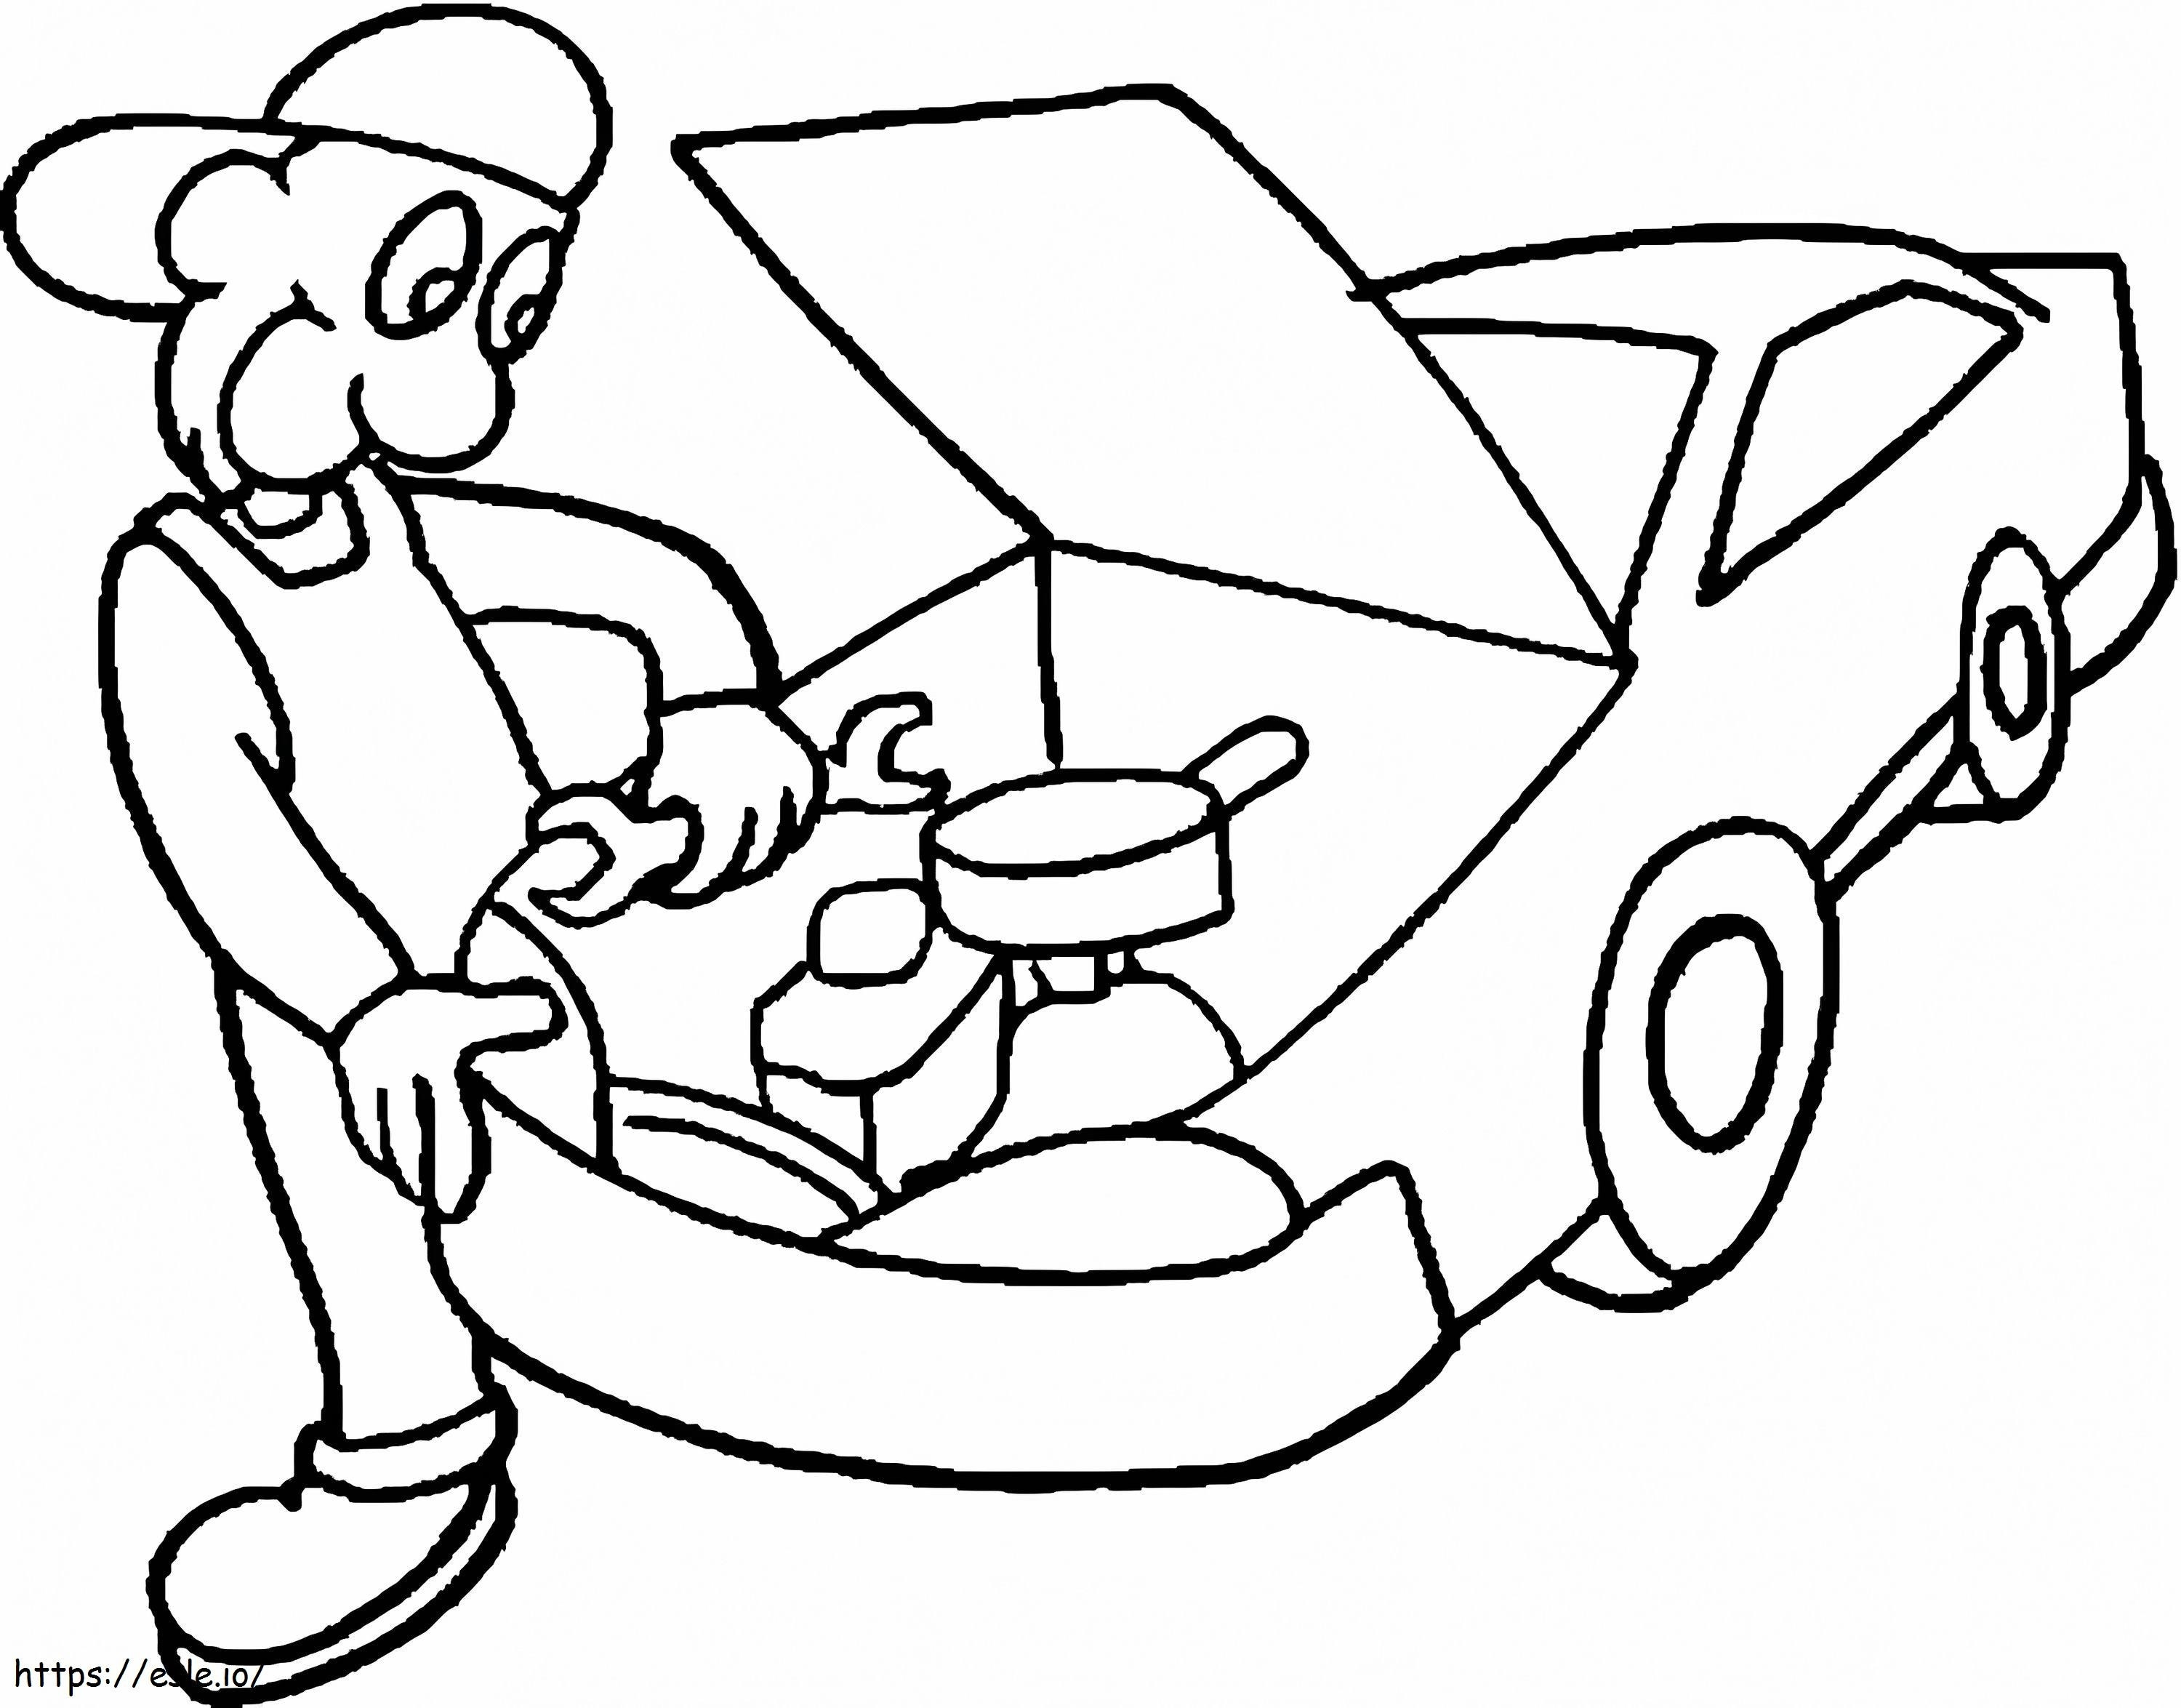 Mechanic 7 coloring page